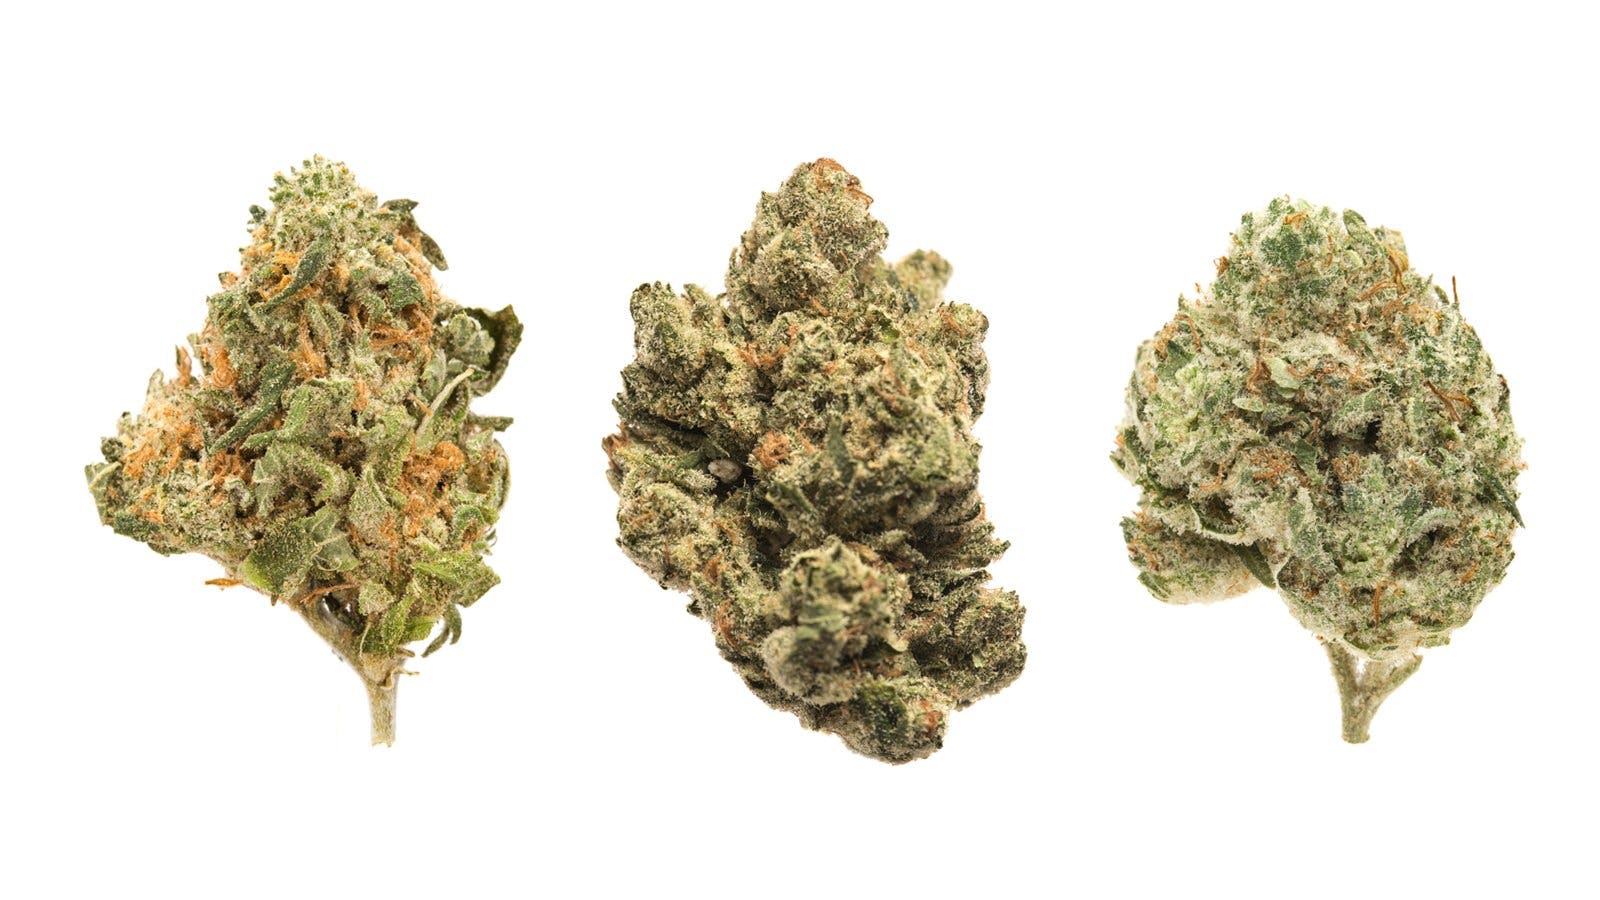 How to decide which strains to try